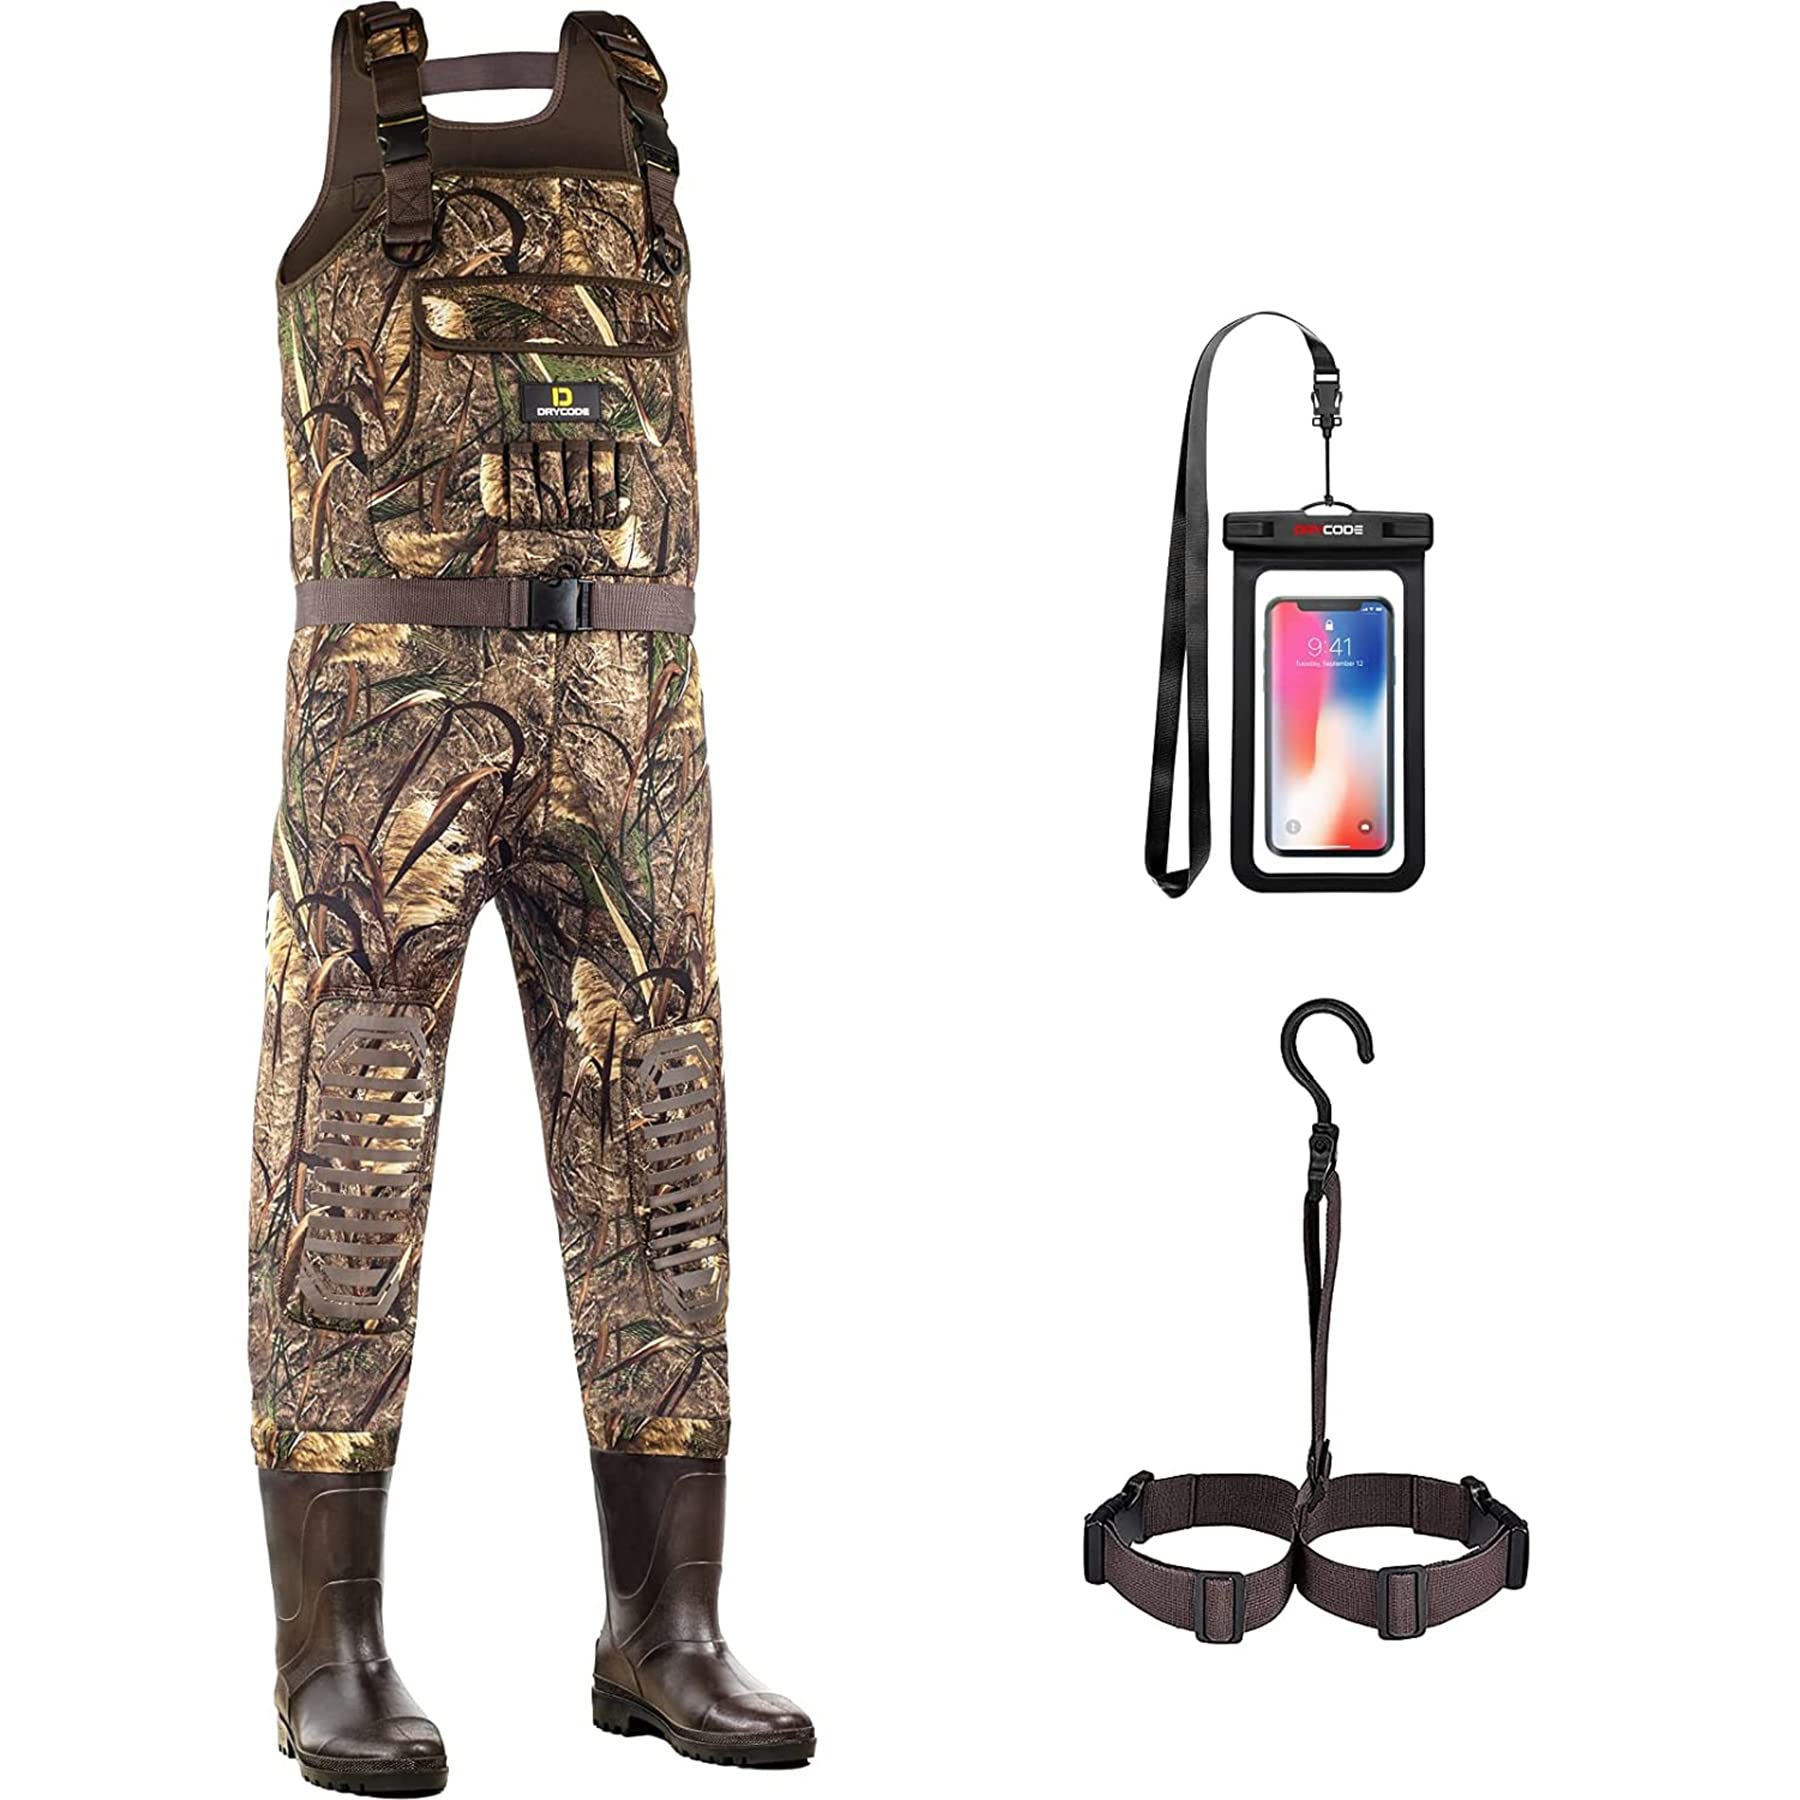 DRYCODE Waders for Men with Boots, Waterproof Neoprene Chest Waders for  Women, Duck Hunting/Fishing Waders